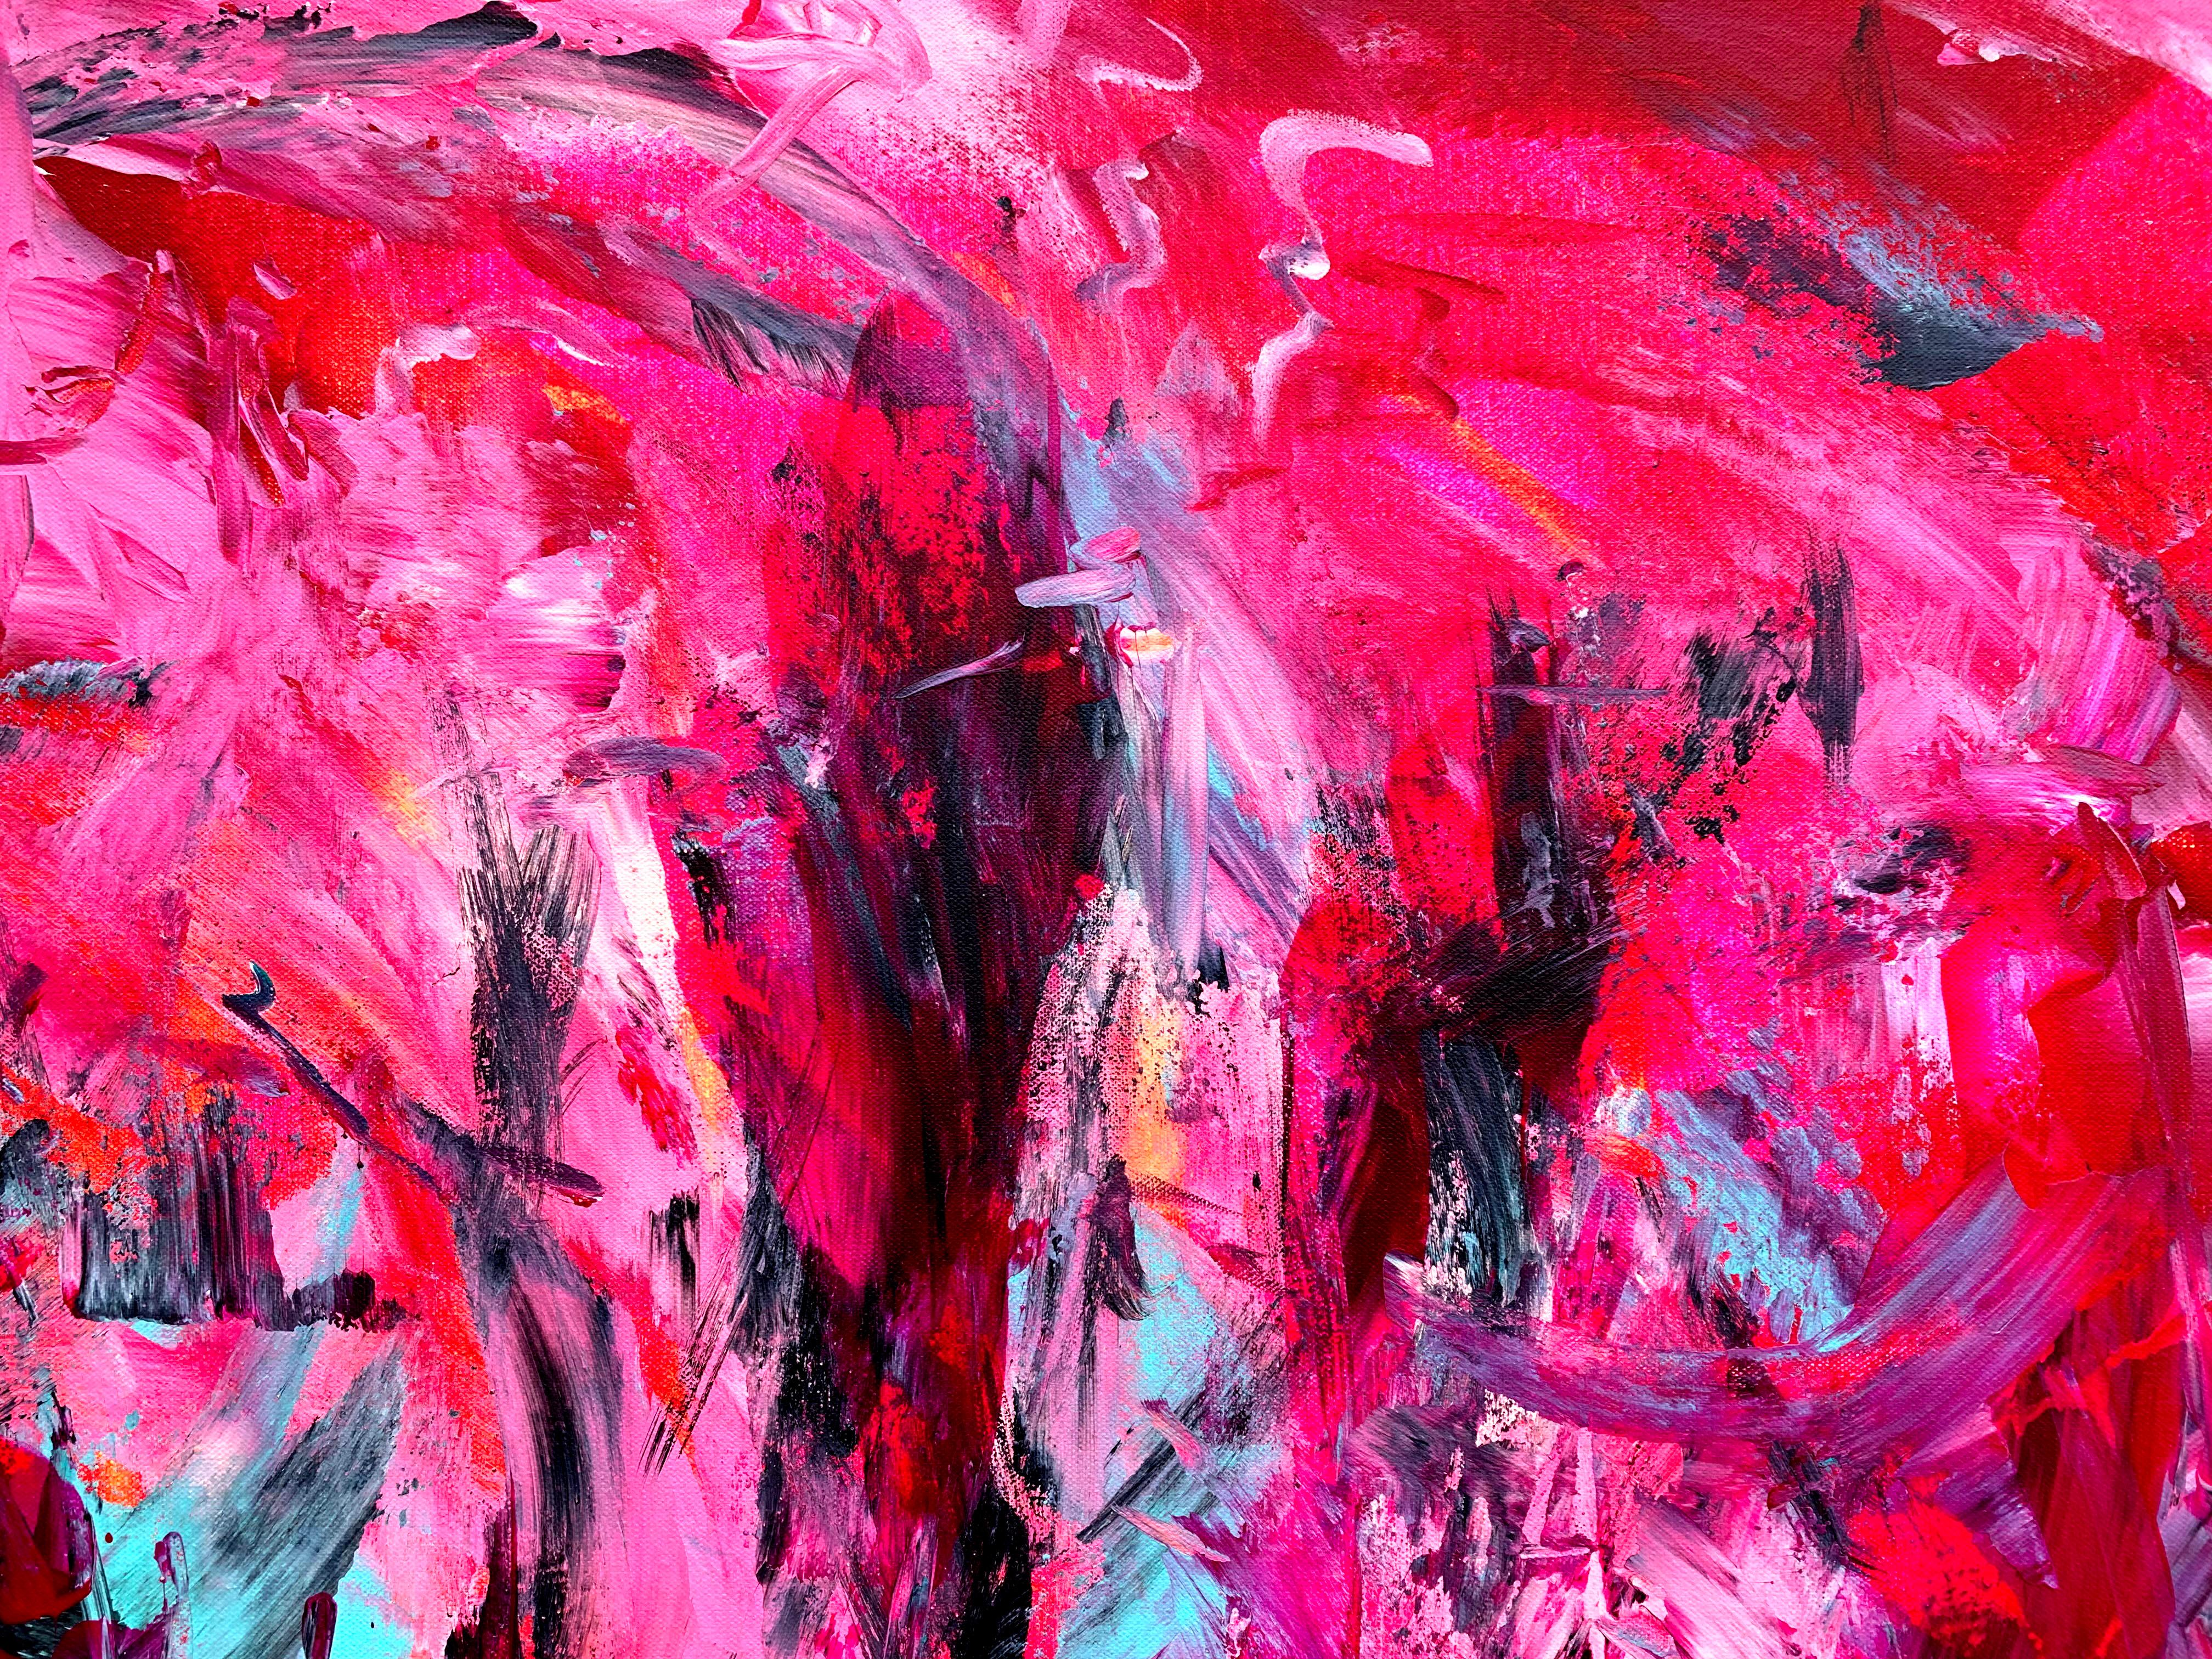 Otherworldly Existence - Abstract Expressionist Painting by Estelle Asmodelle